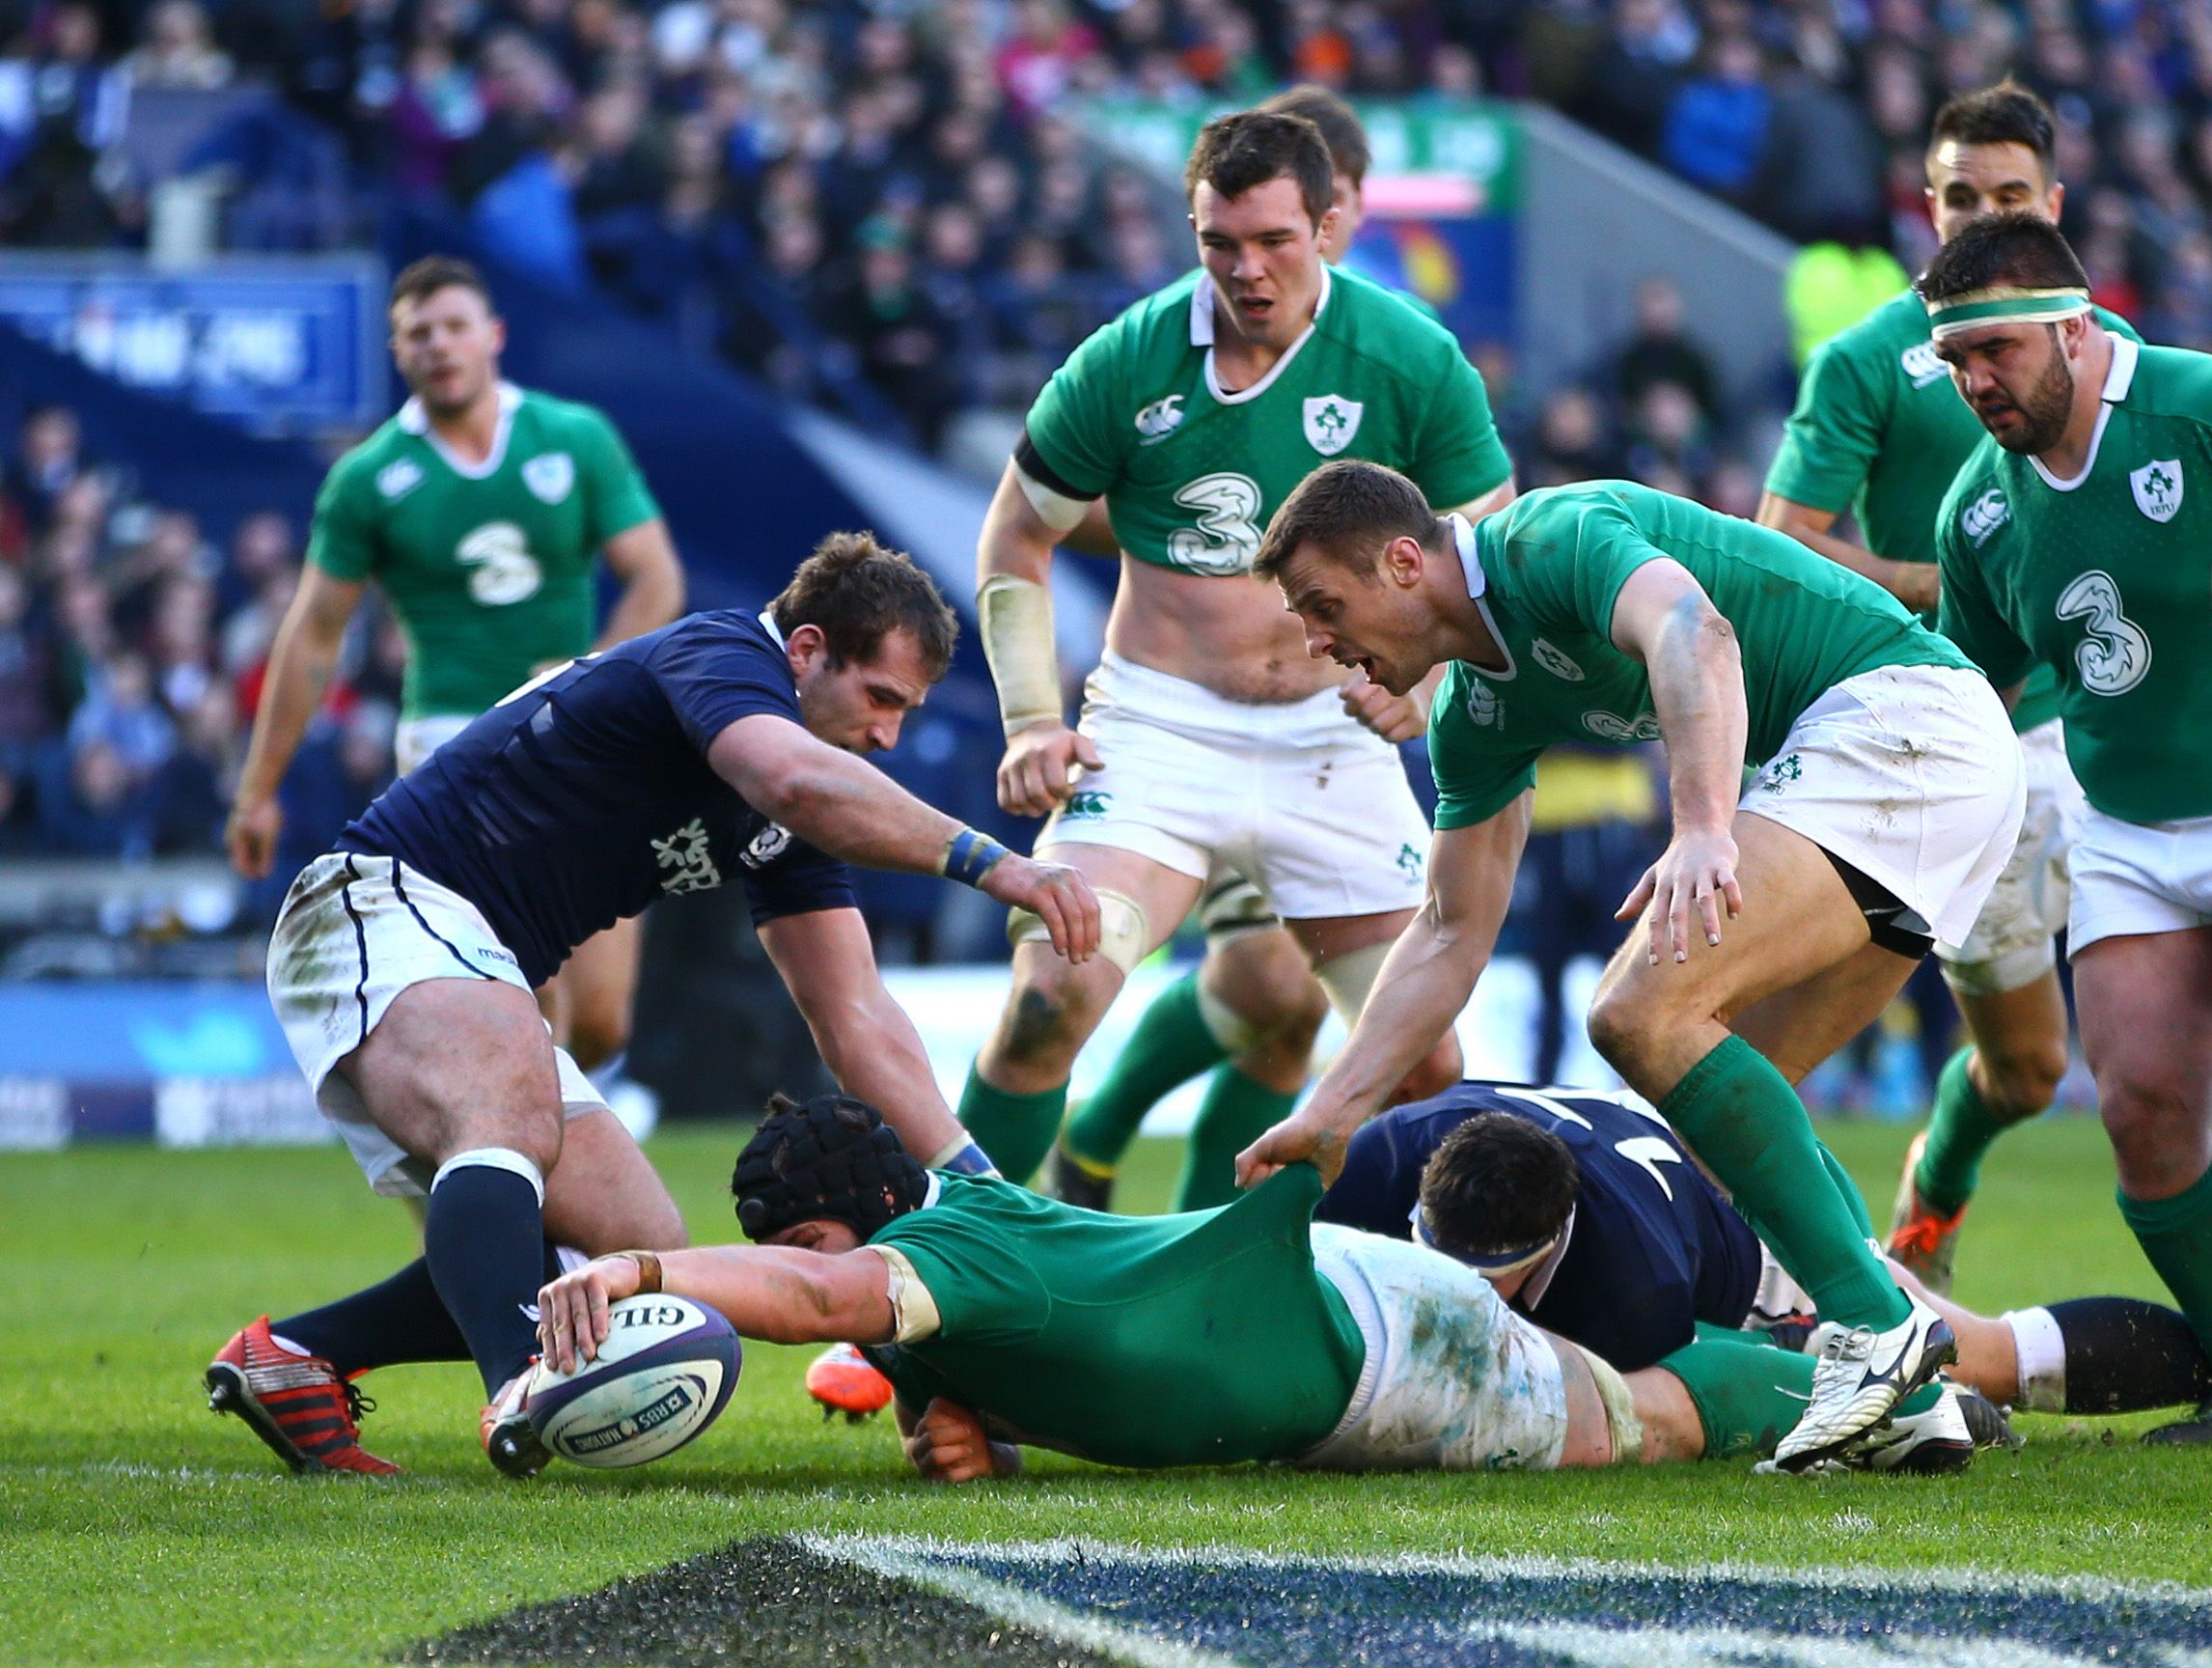 during the RBS Six Nations match between Scotland and Ireland at Murrayfield on March 21, 2015 in Edinburgh, Scotland.